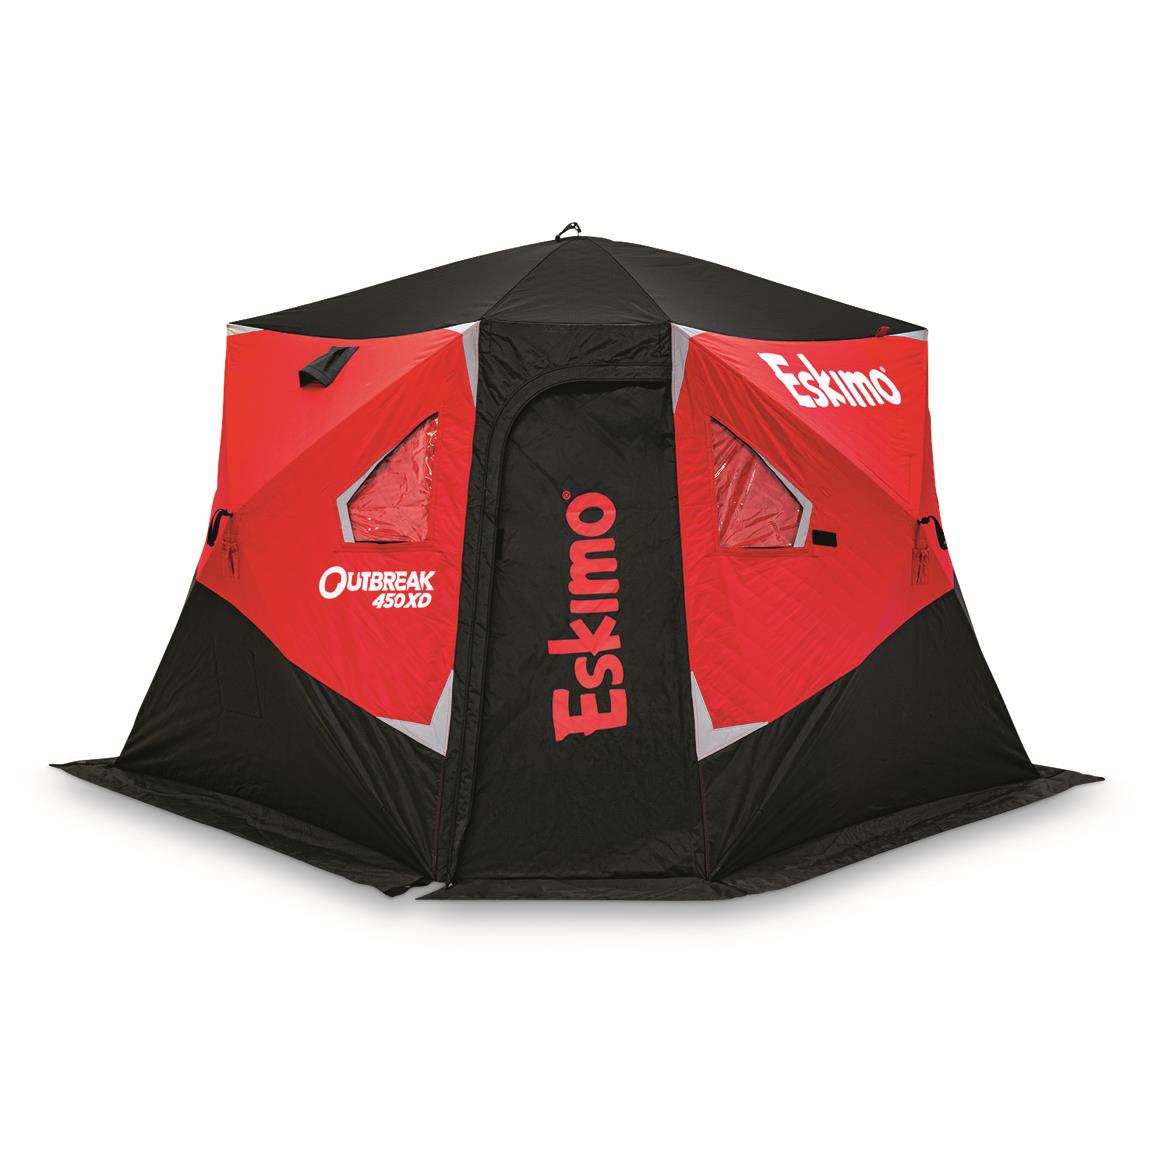 Eskimo Outbreak 450XD Insulated Hub-Style Ice Fishing Shelter, 5-Person